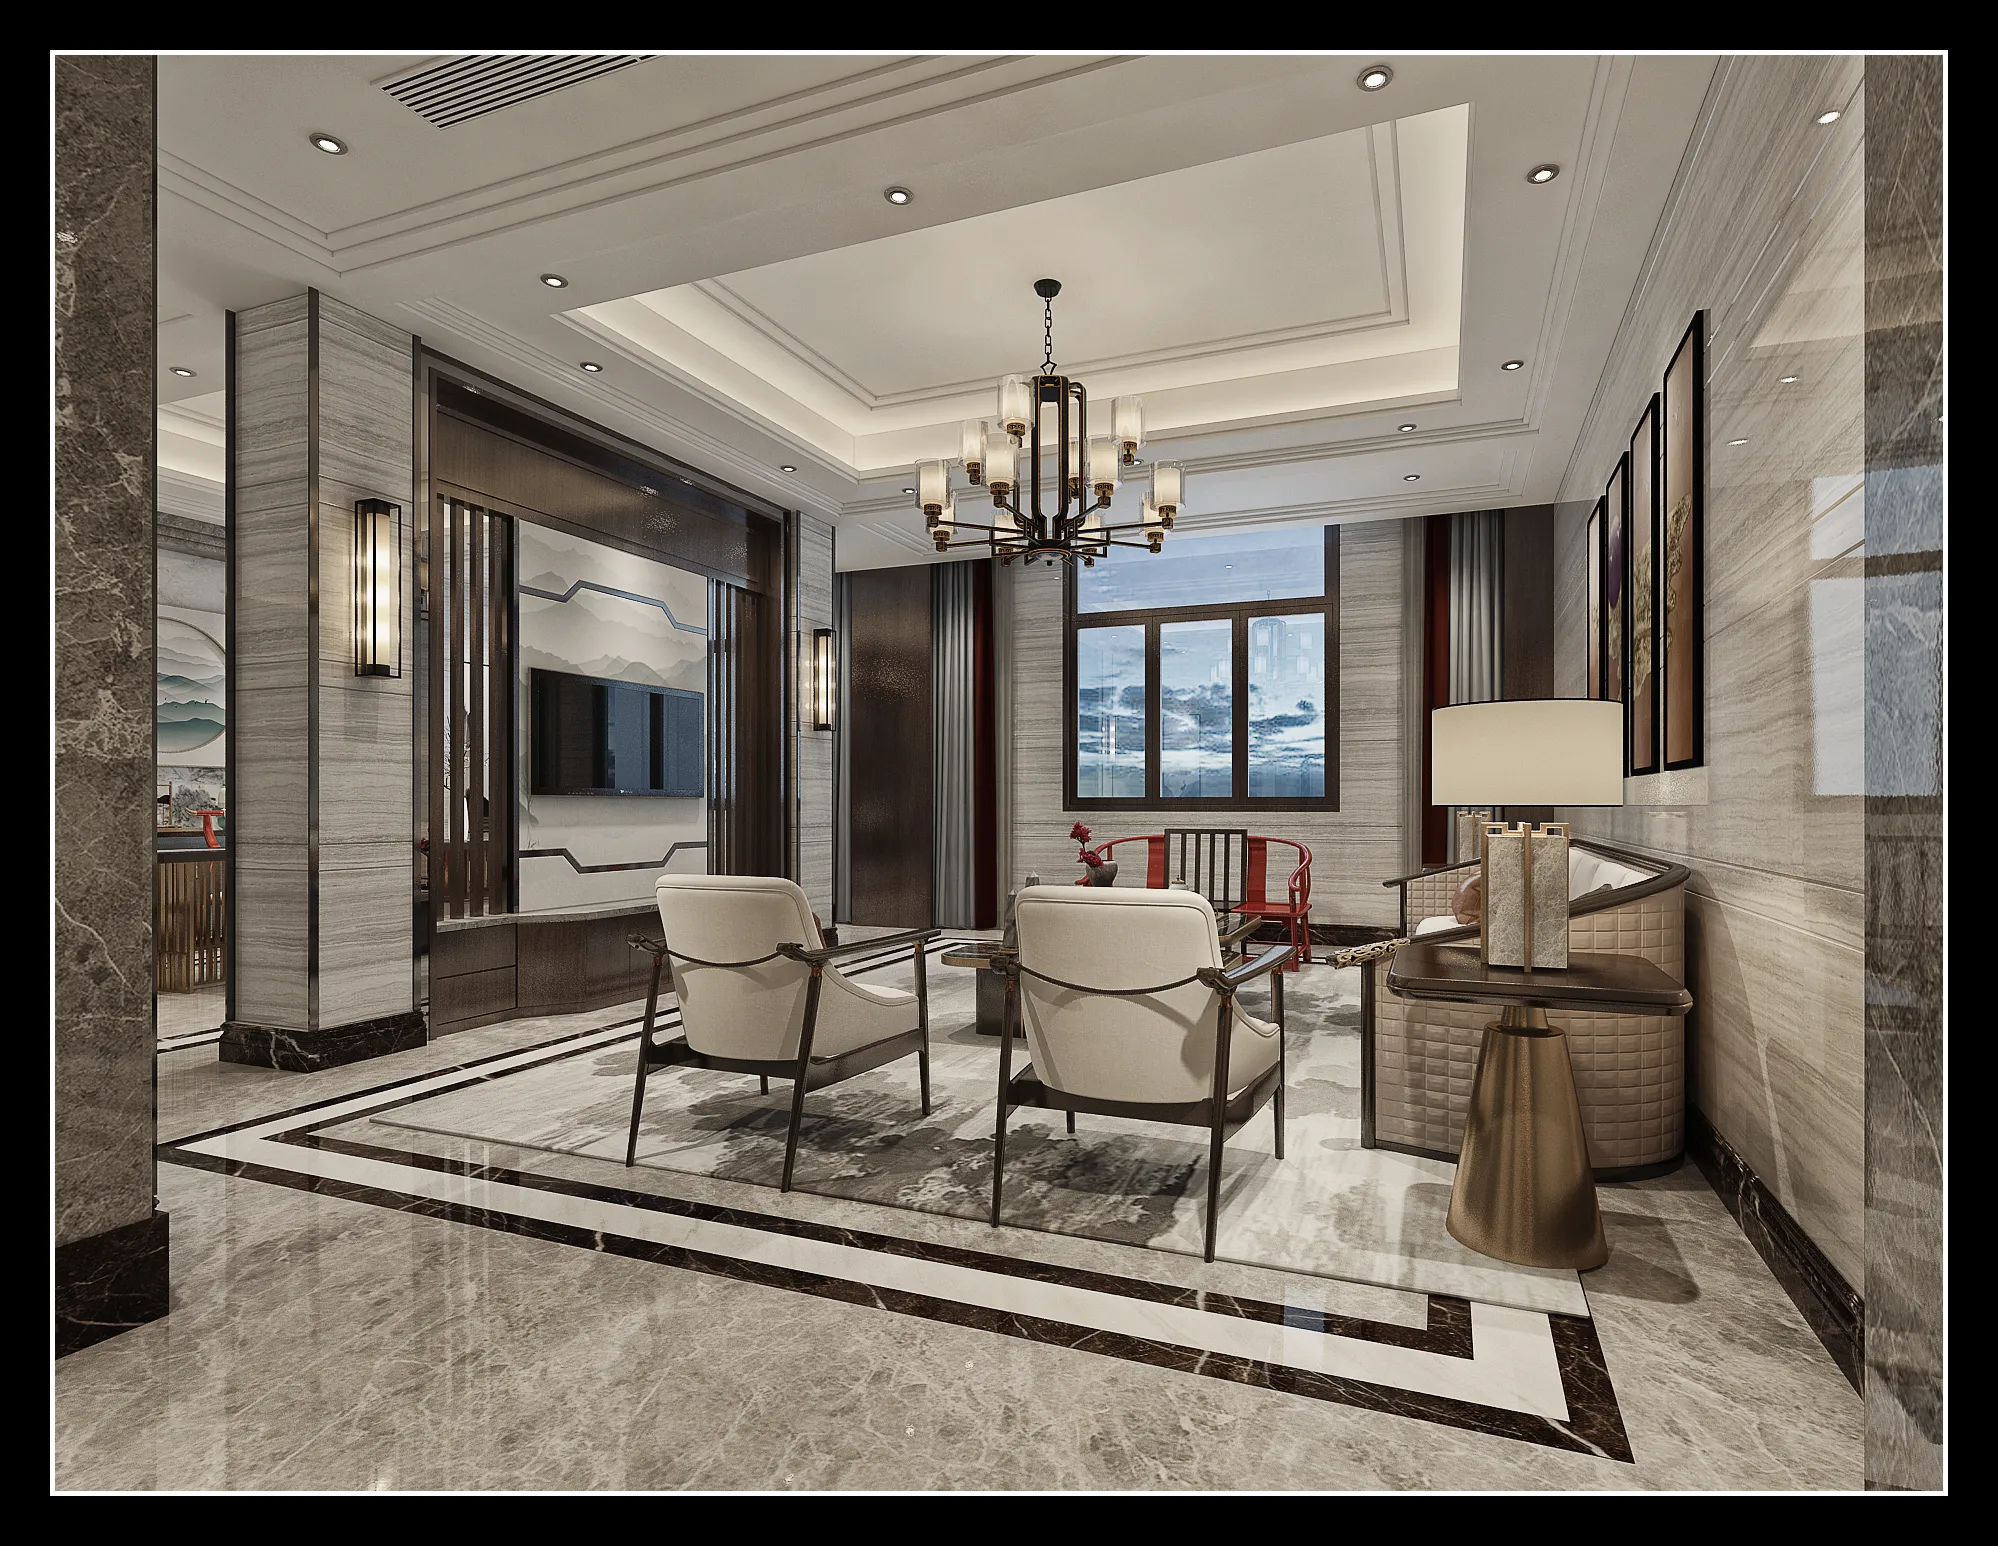 DESMOD INTERIOR 2021 (VRAY) – 4. LIVING ROOM – CHINESE – 083